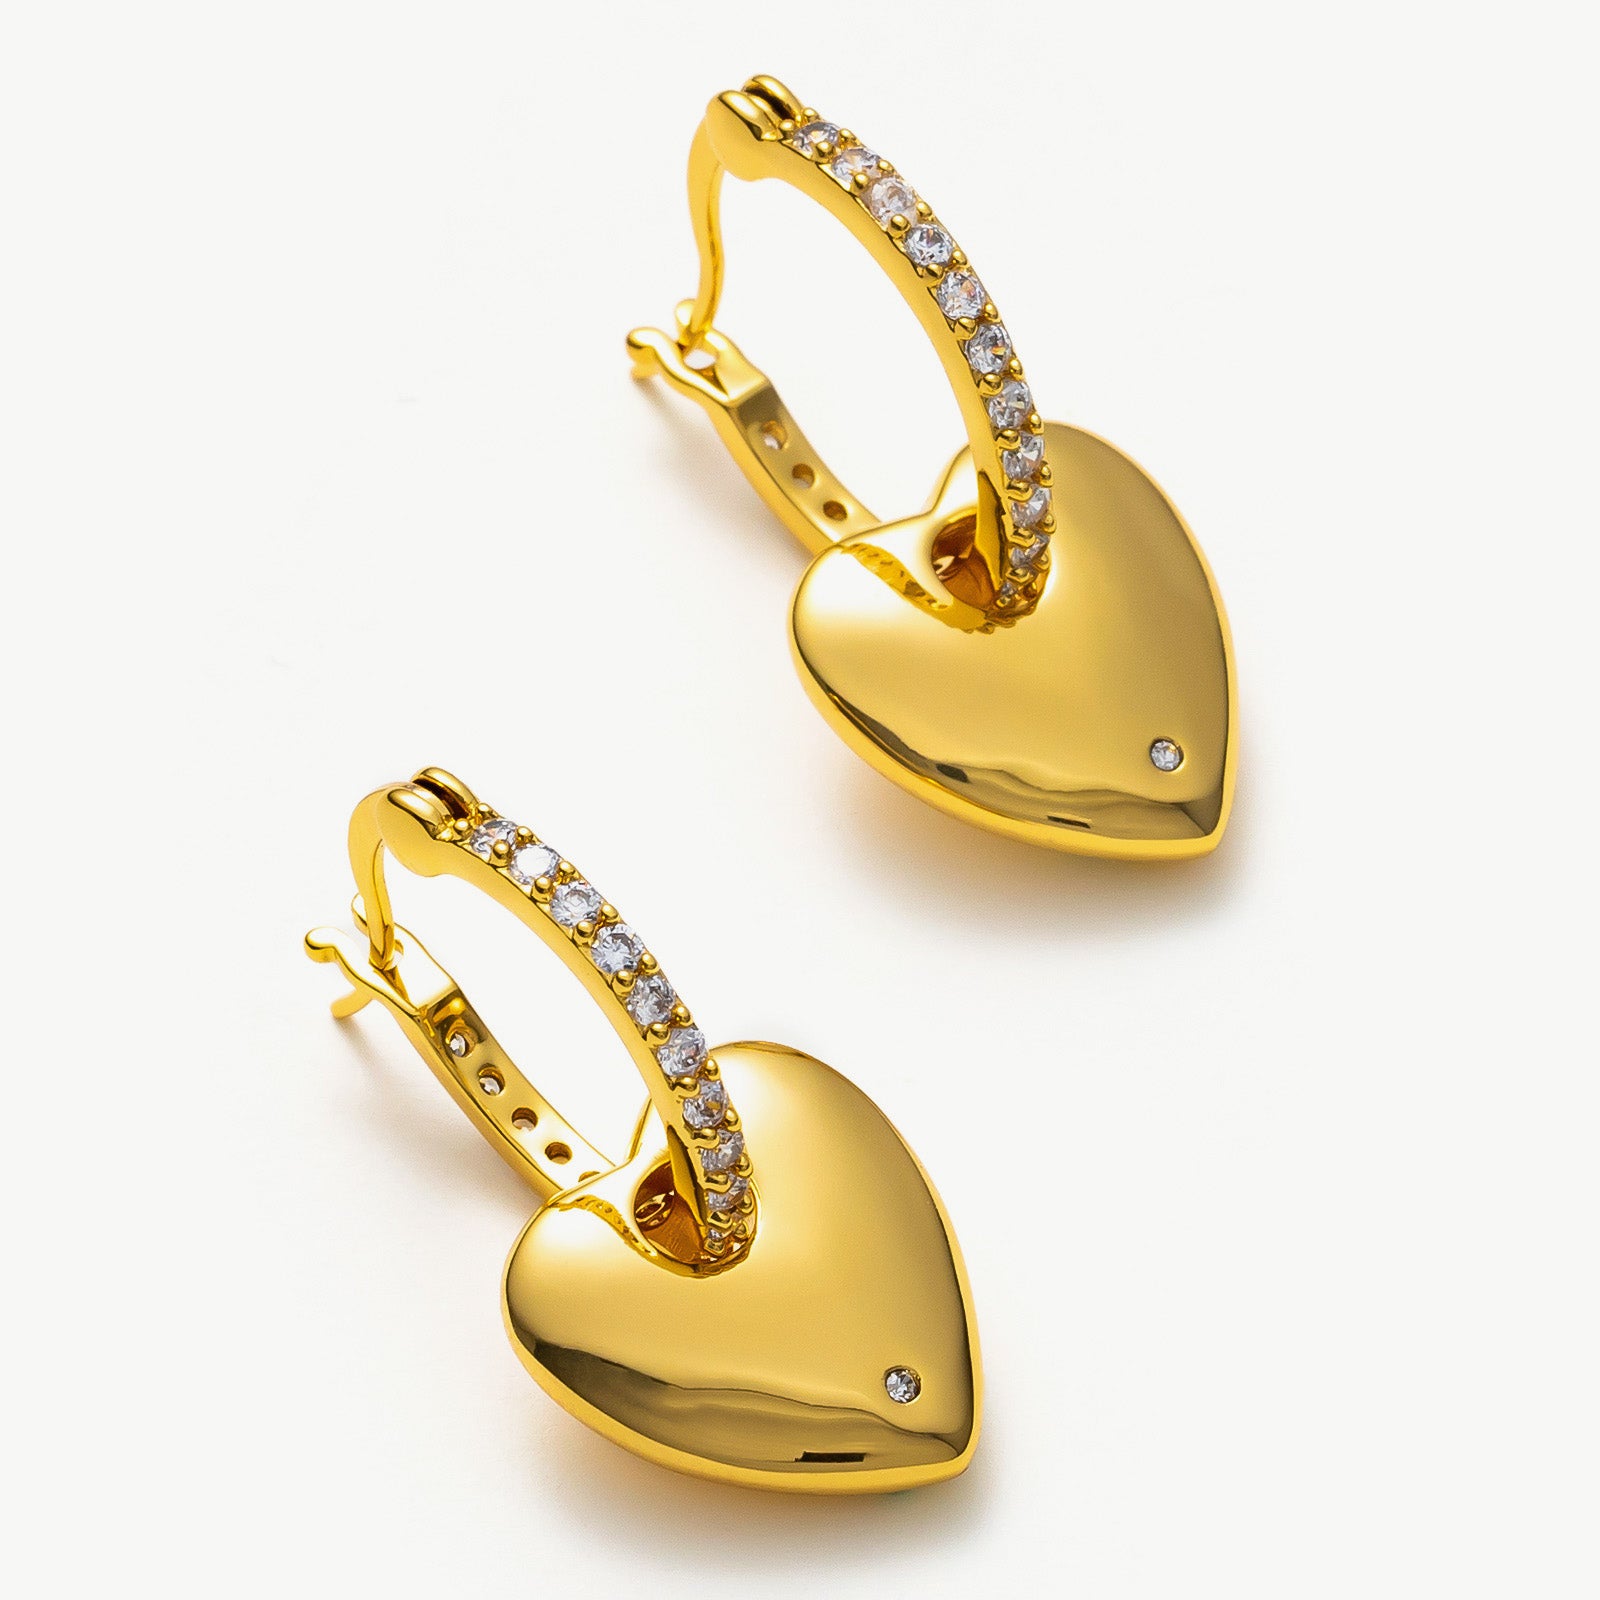  Hoop Earrings with golden heart and crystal charms, a whimsical and romantic choice that adds a touch of playfulness to your ensemble